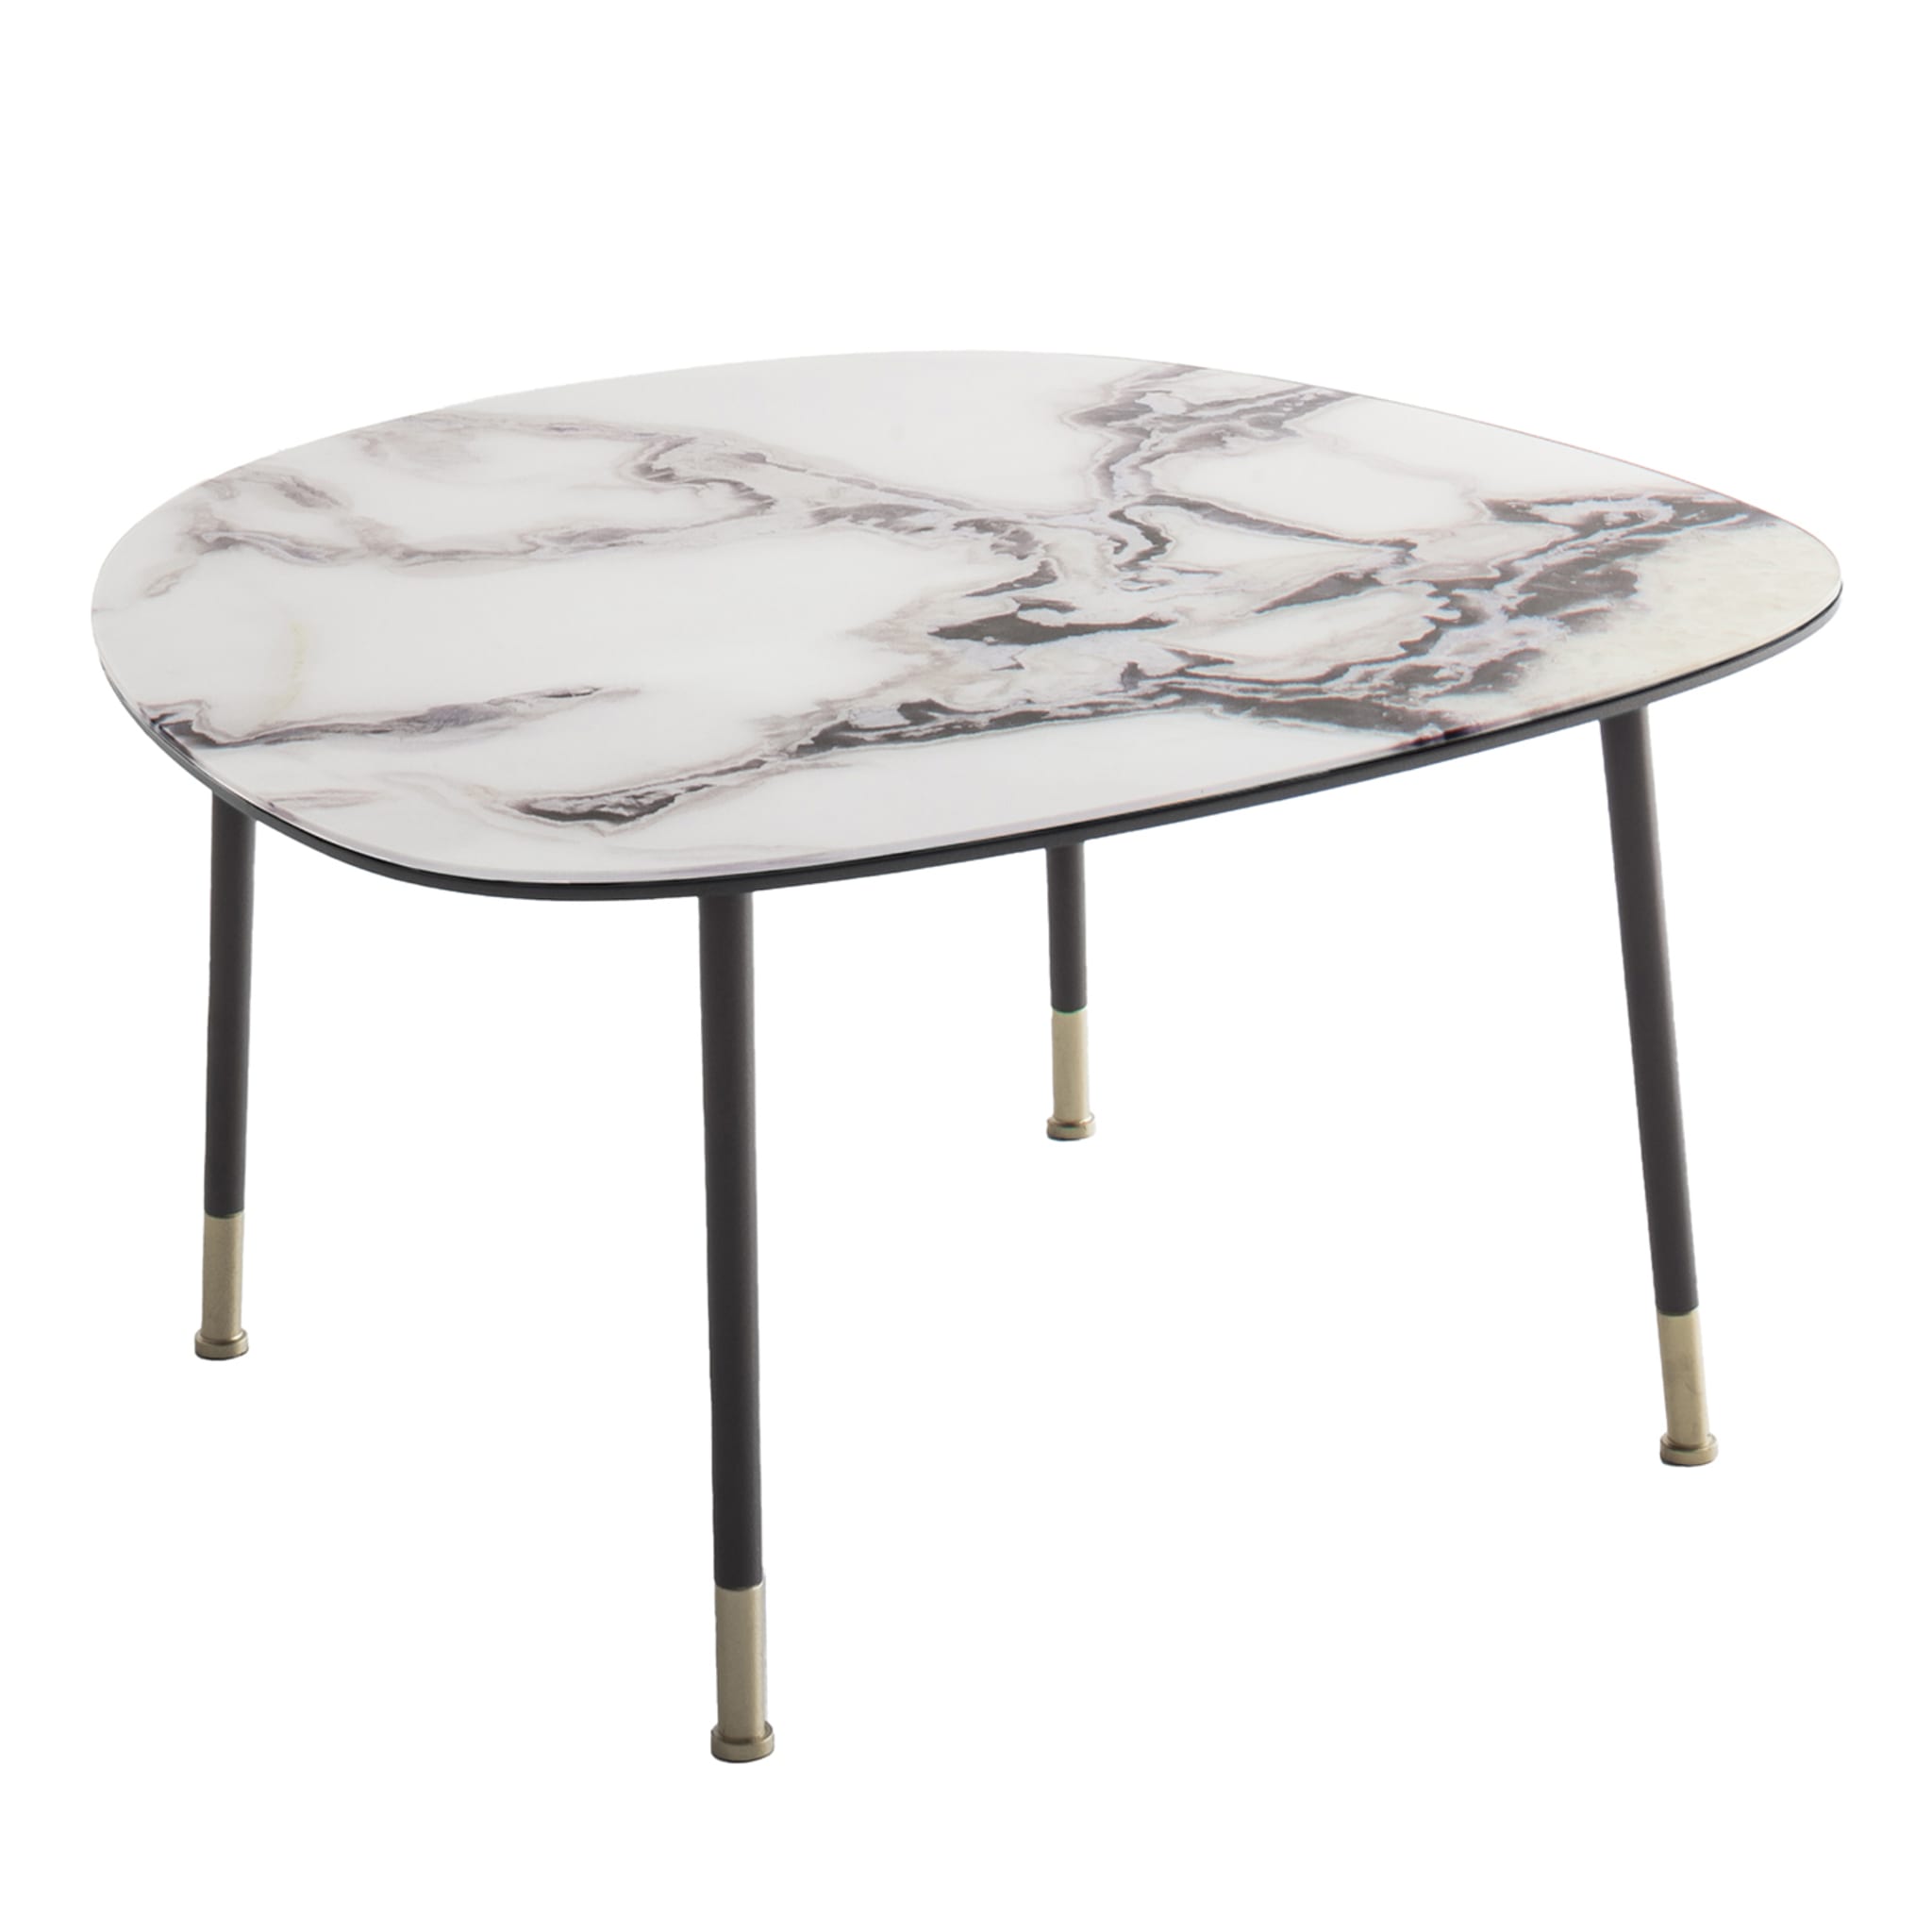 Pebble Large Trinity White Marble-Effect Coffee Table - Main view